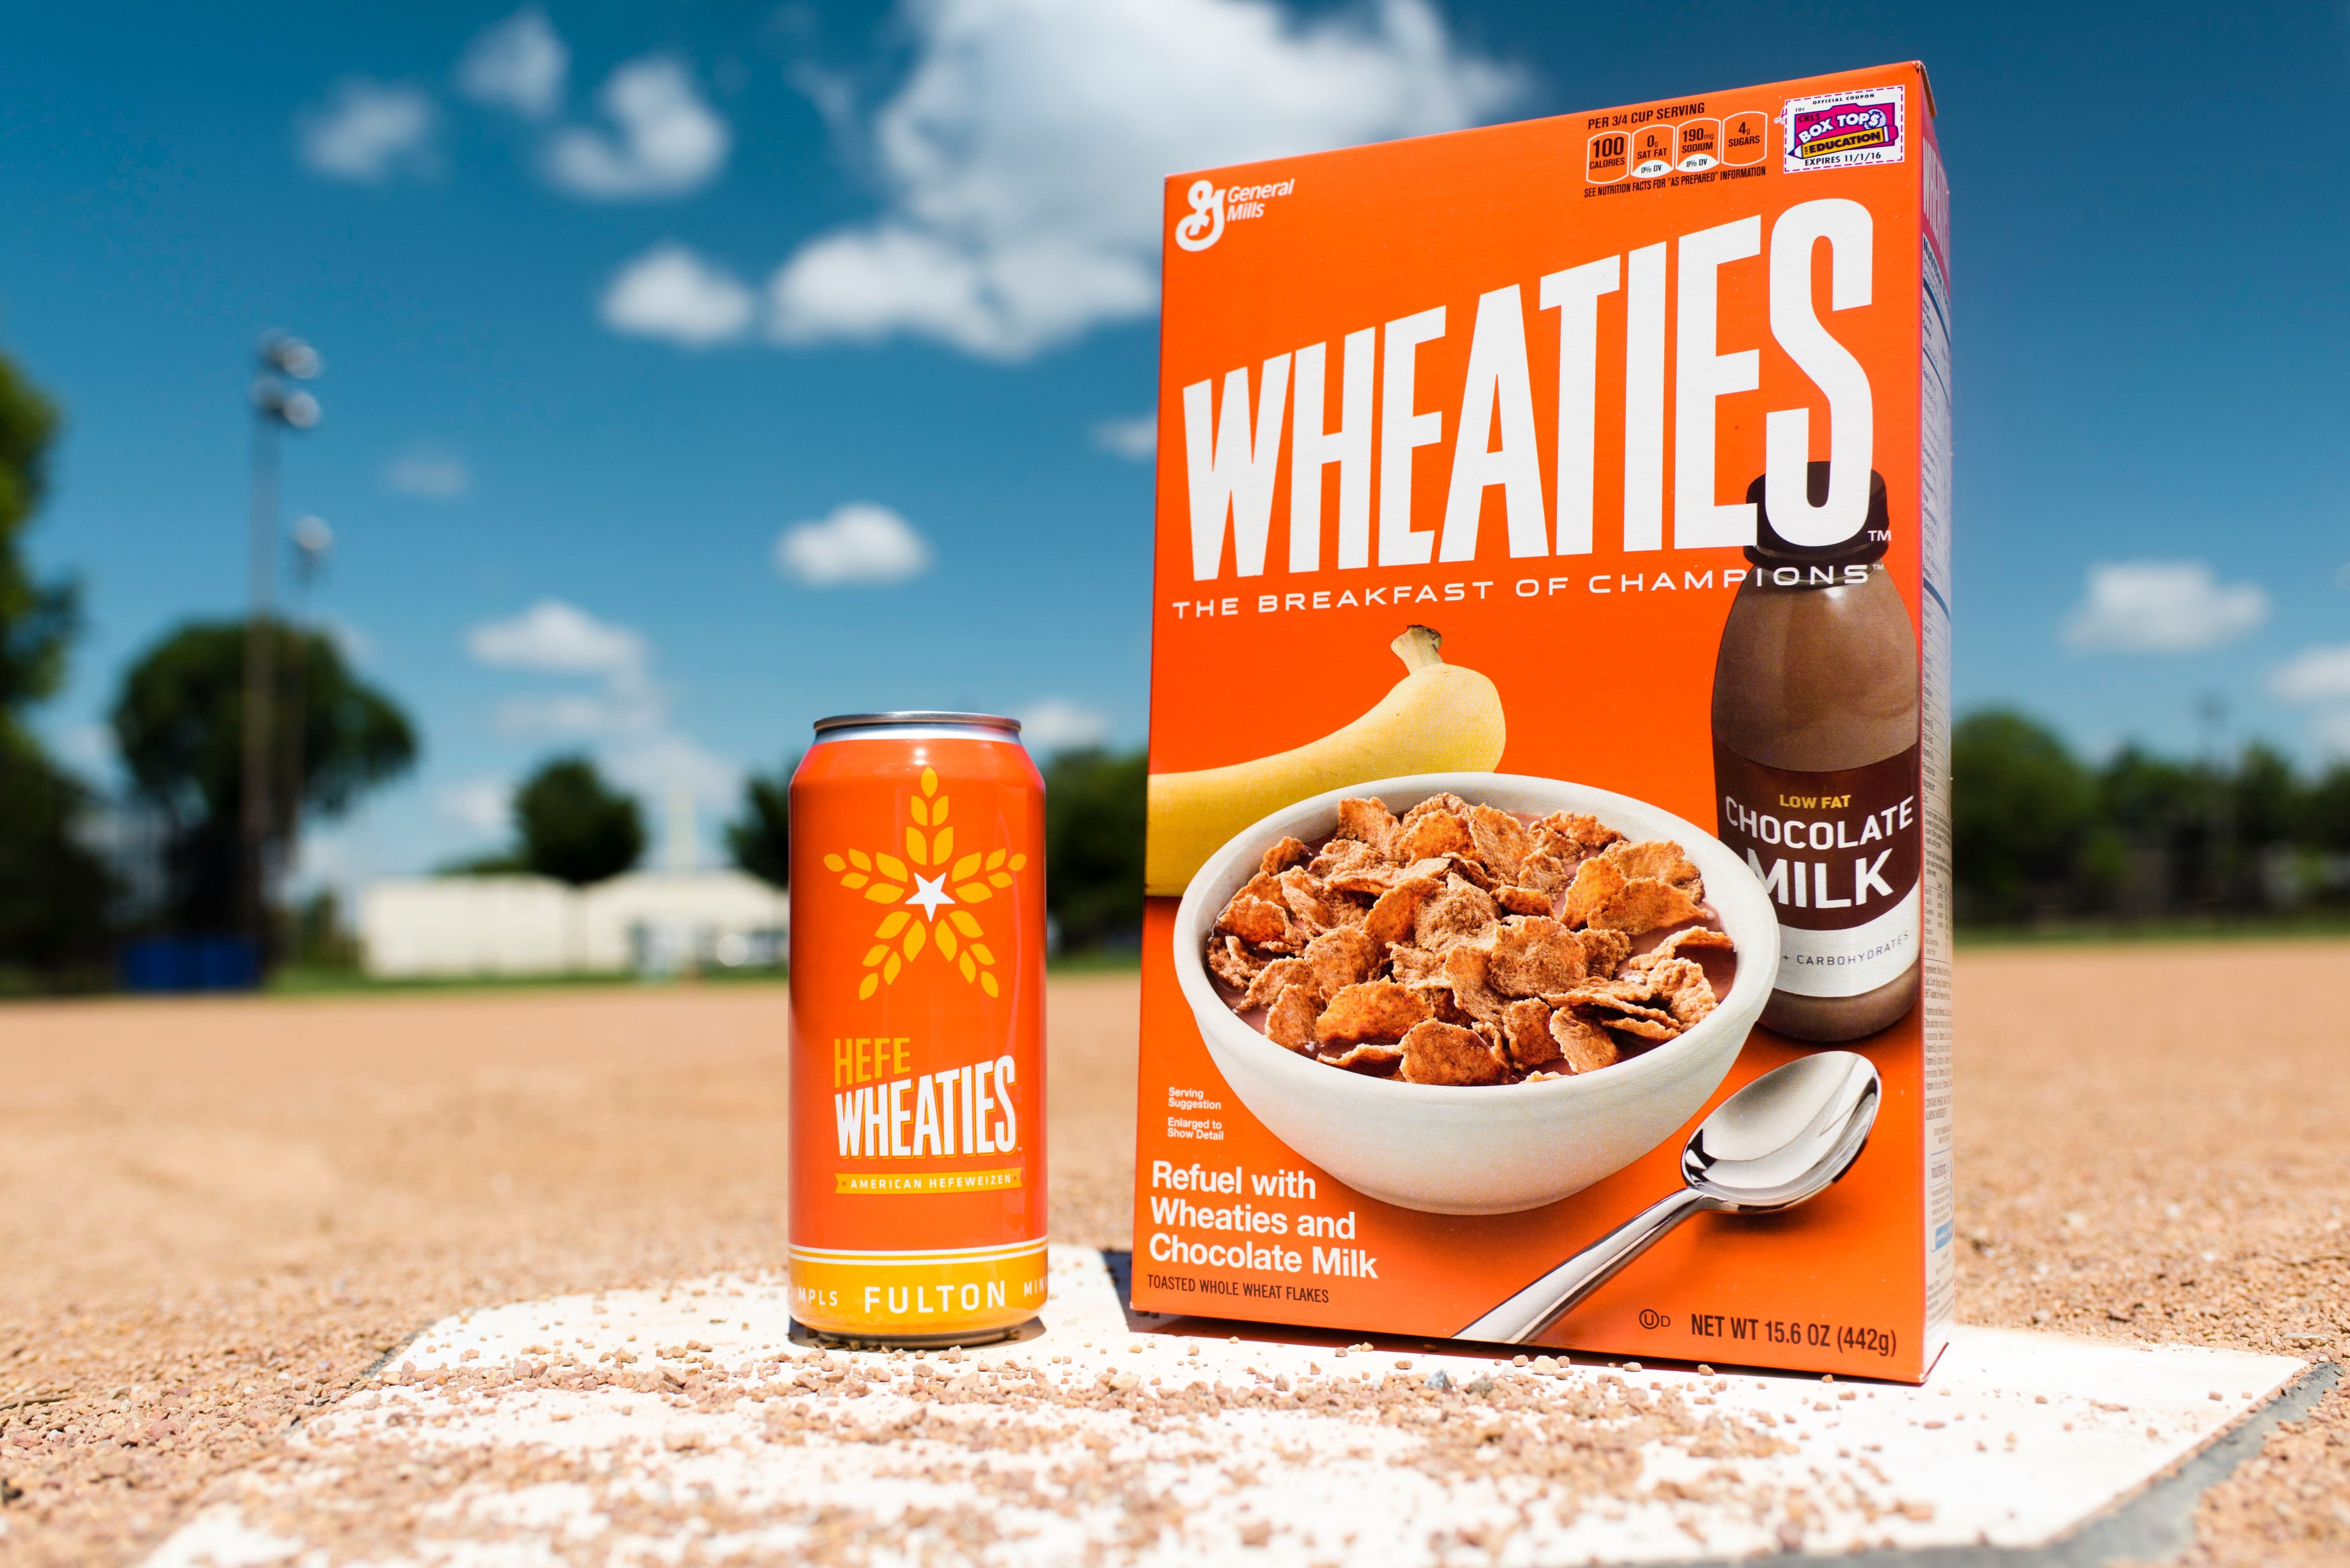 Box of Wheaties cereal and the limited-edition HefeWheaties beer.